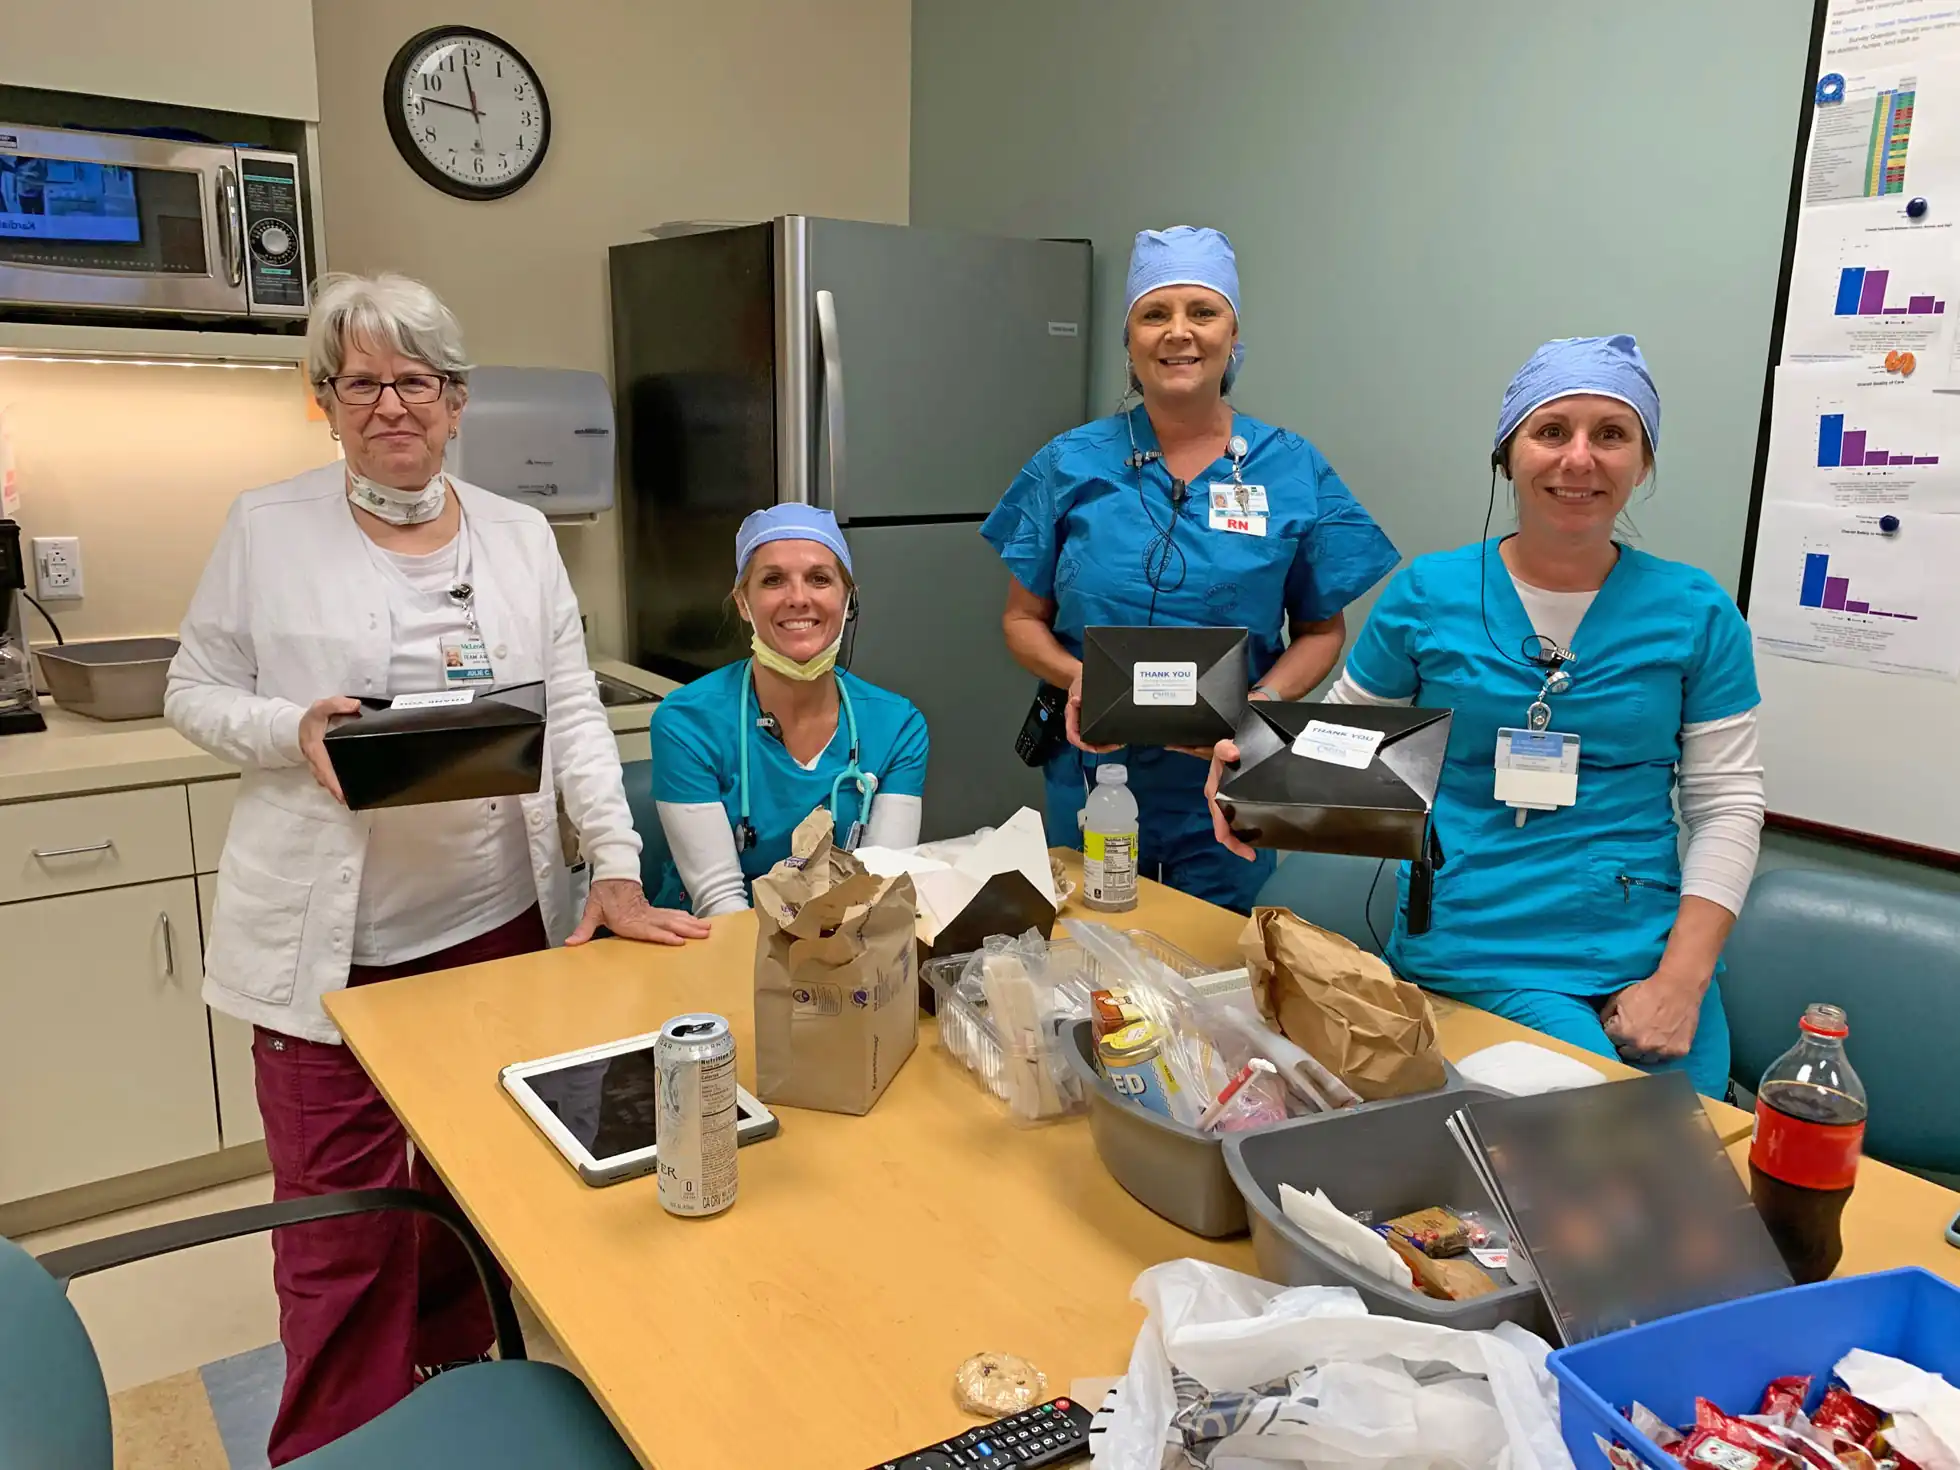 Capital Cares provided lunch for the employees of McLeod Seacoast Hospital Feature Image